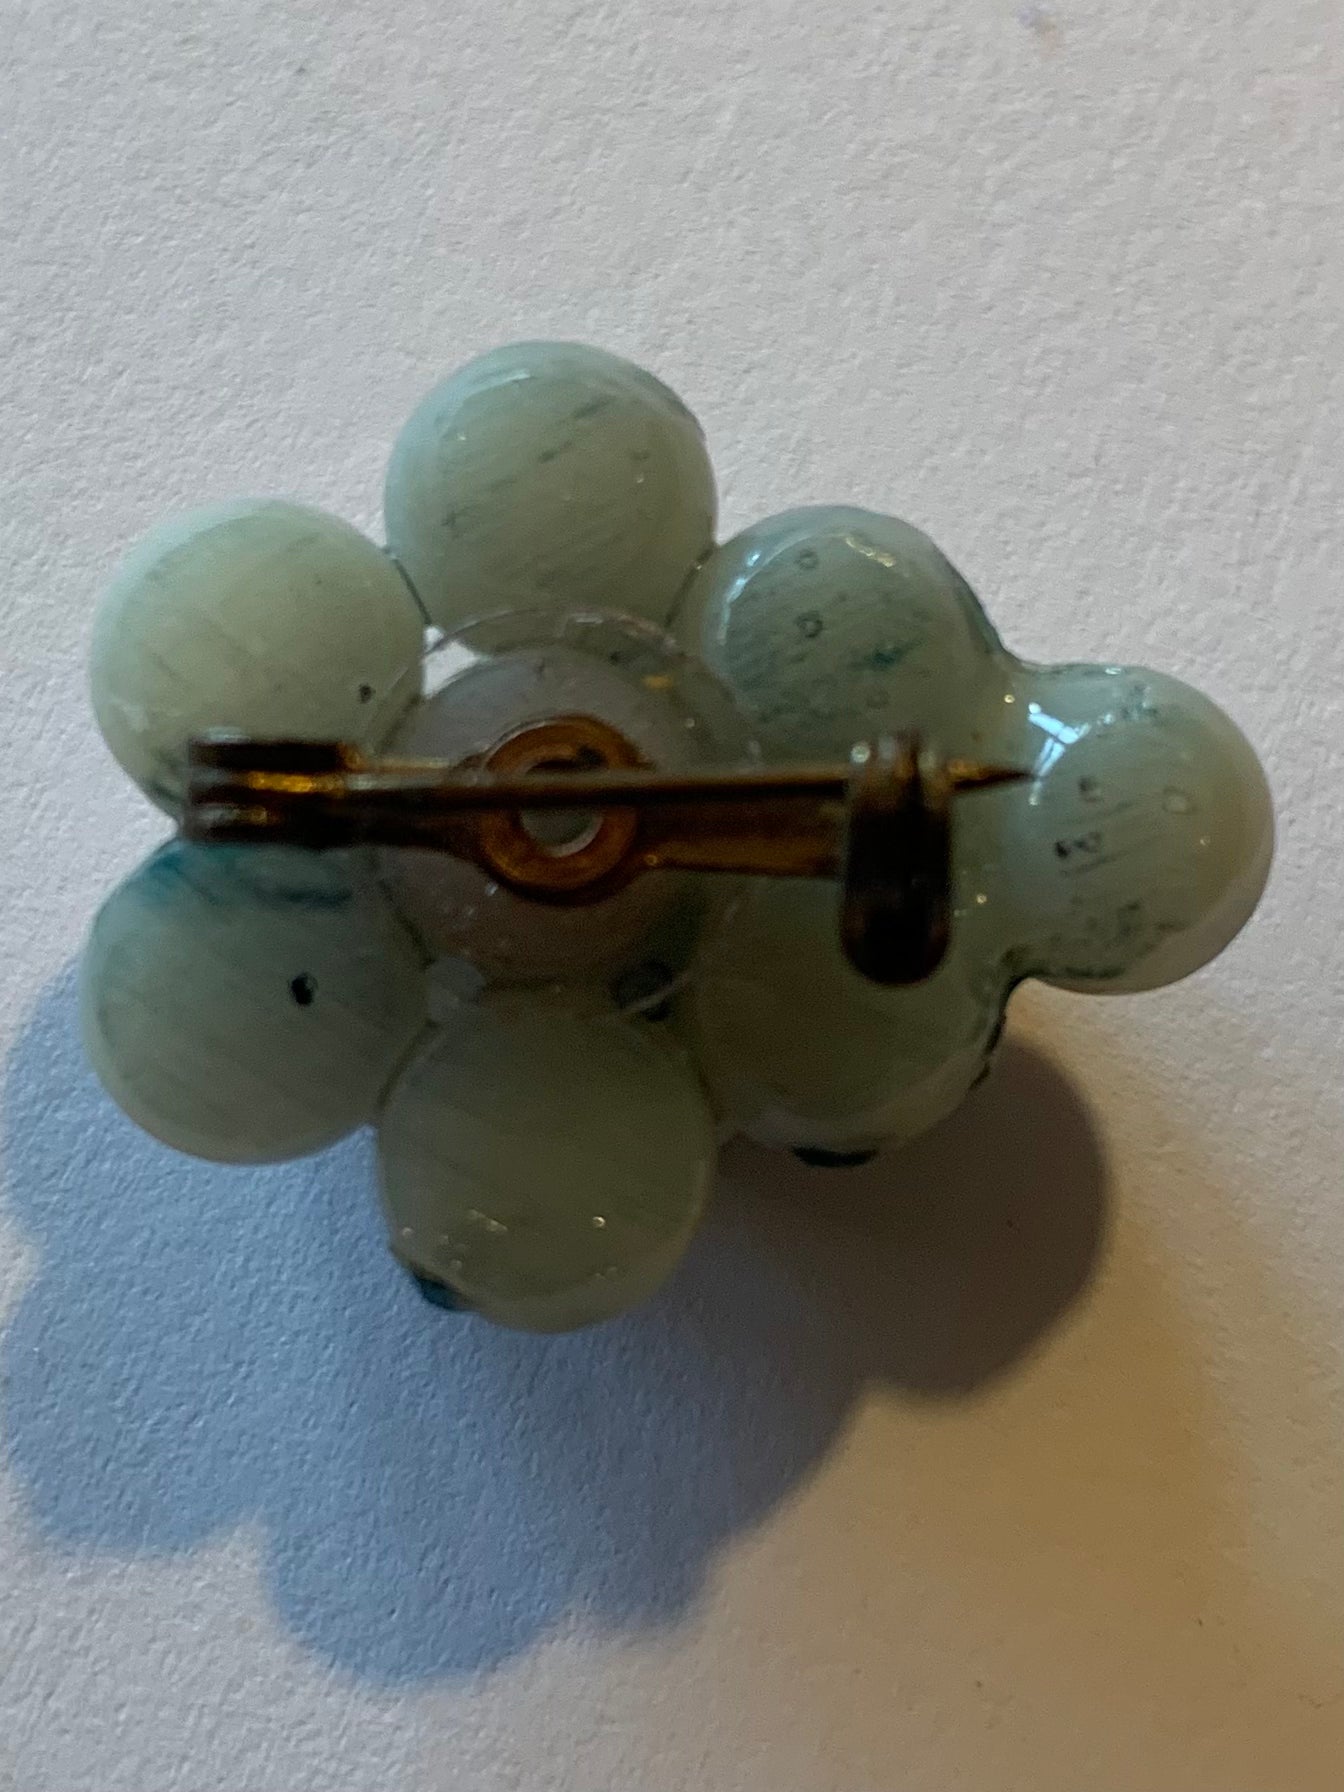 Chic Little Caviar Style Celluloid Bubble Brooch with Green Rhinestones circa 1930s